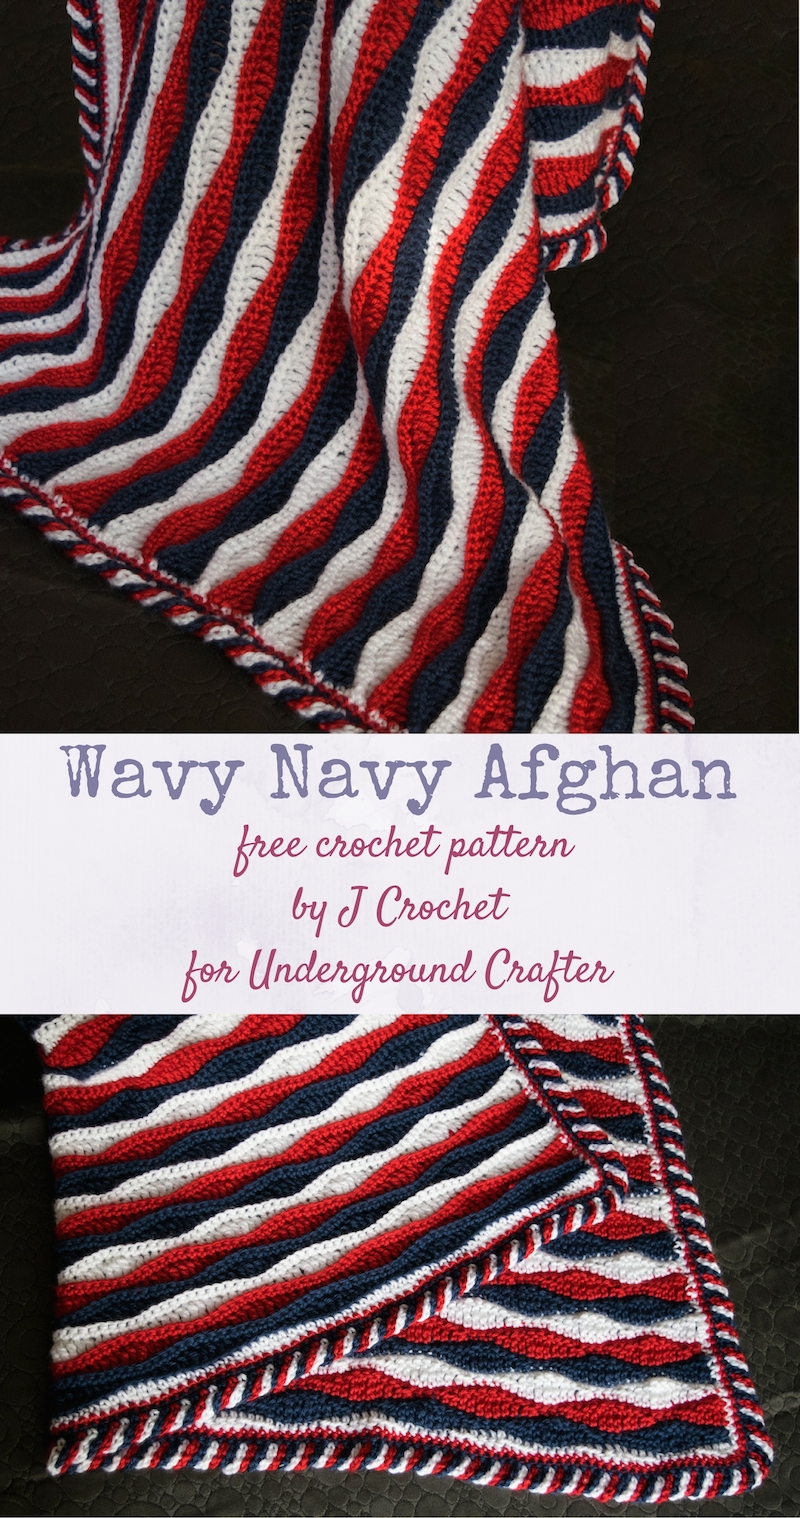 Free crochet pattern: Wavy Navy Afghan in Caron Simply Soft yarn by J Crochet via Underground Crafter | This tri-color blanket has a delightful candy cane border and includes instructions in U.S. terms and with international stitch symbol charts.